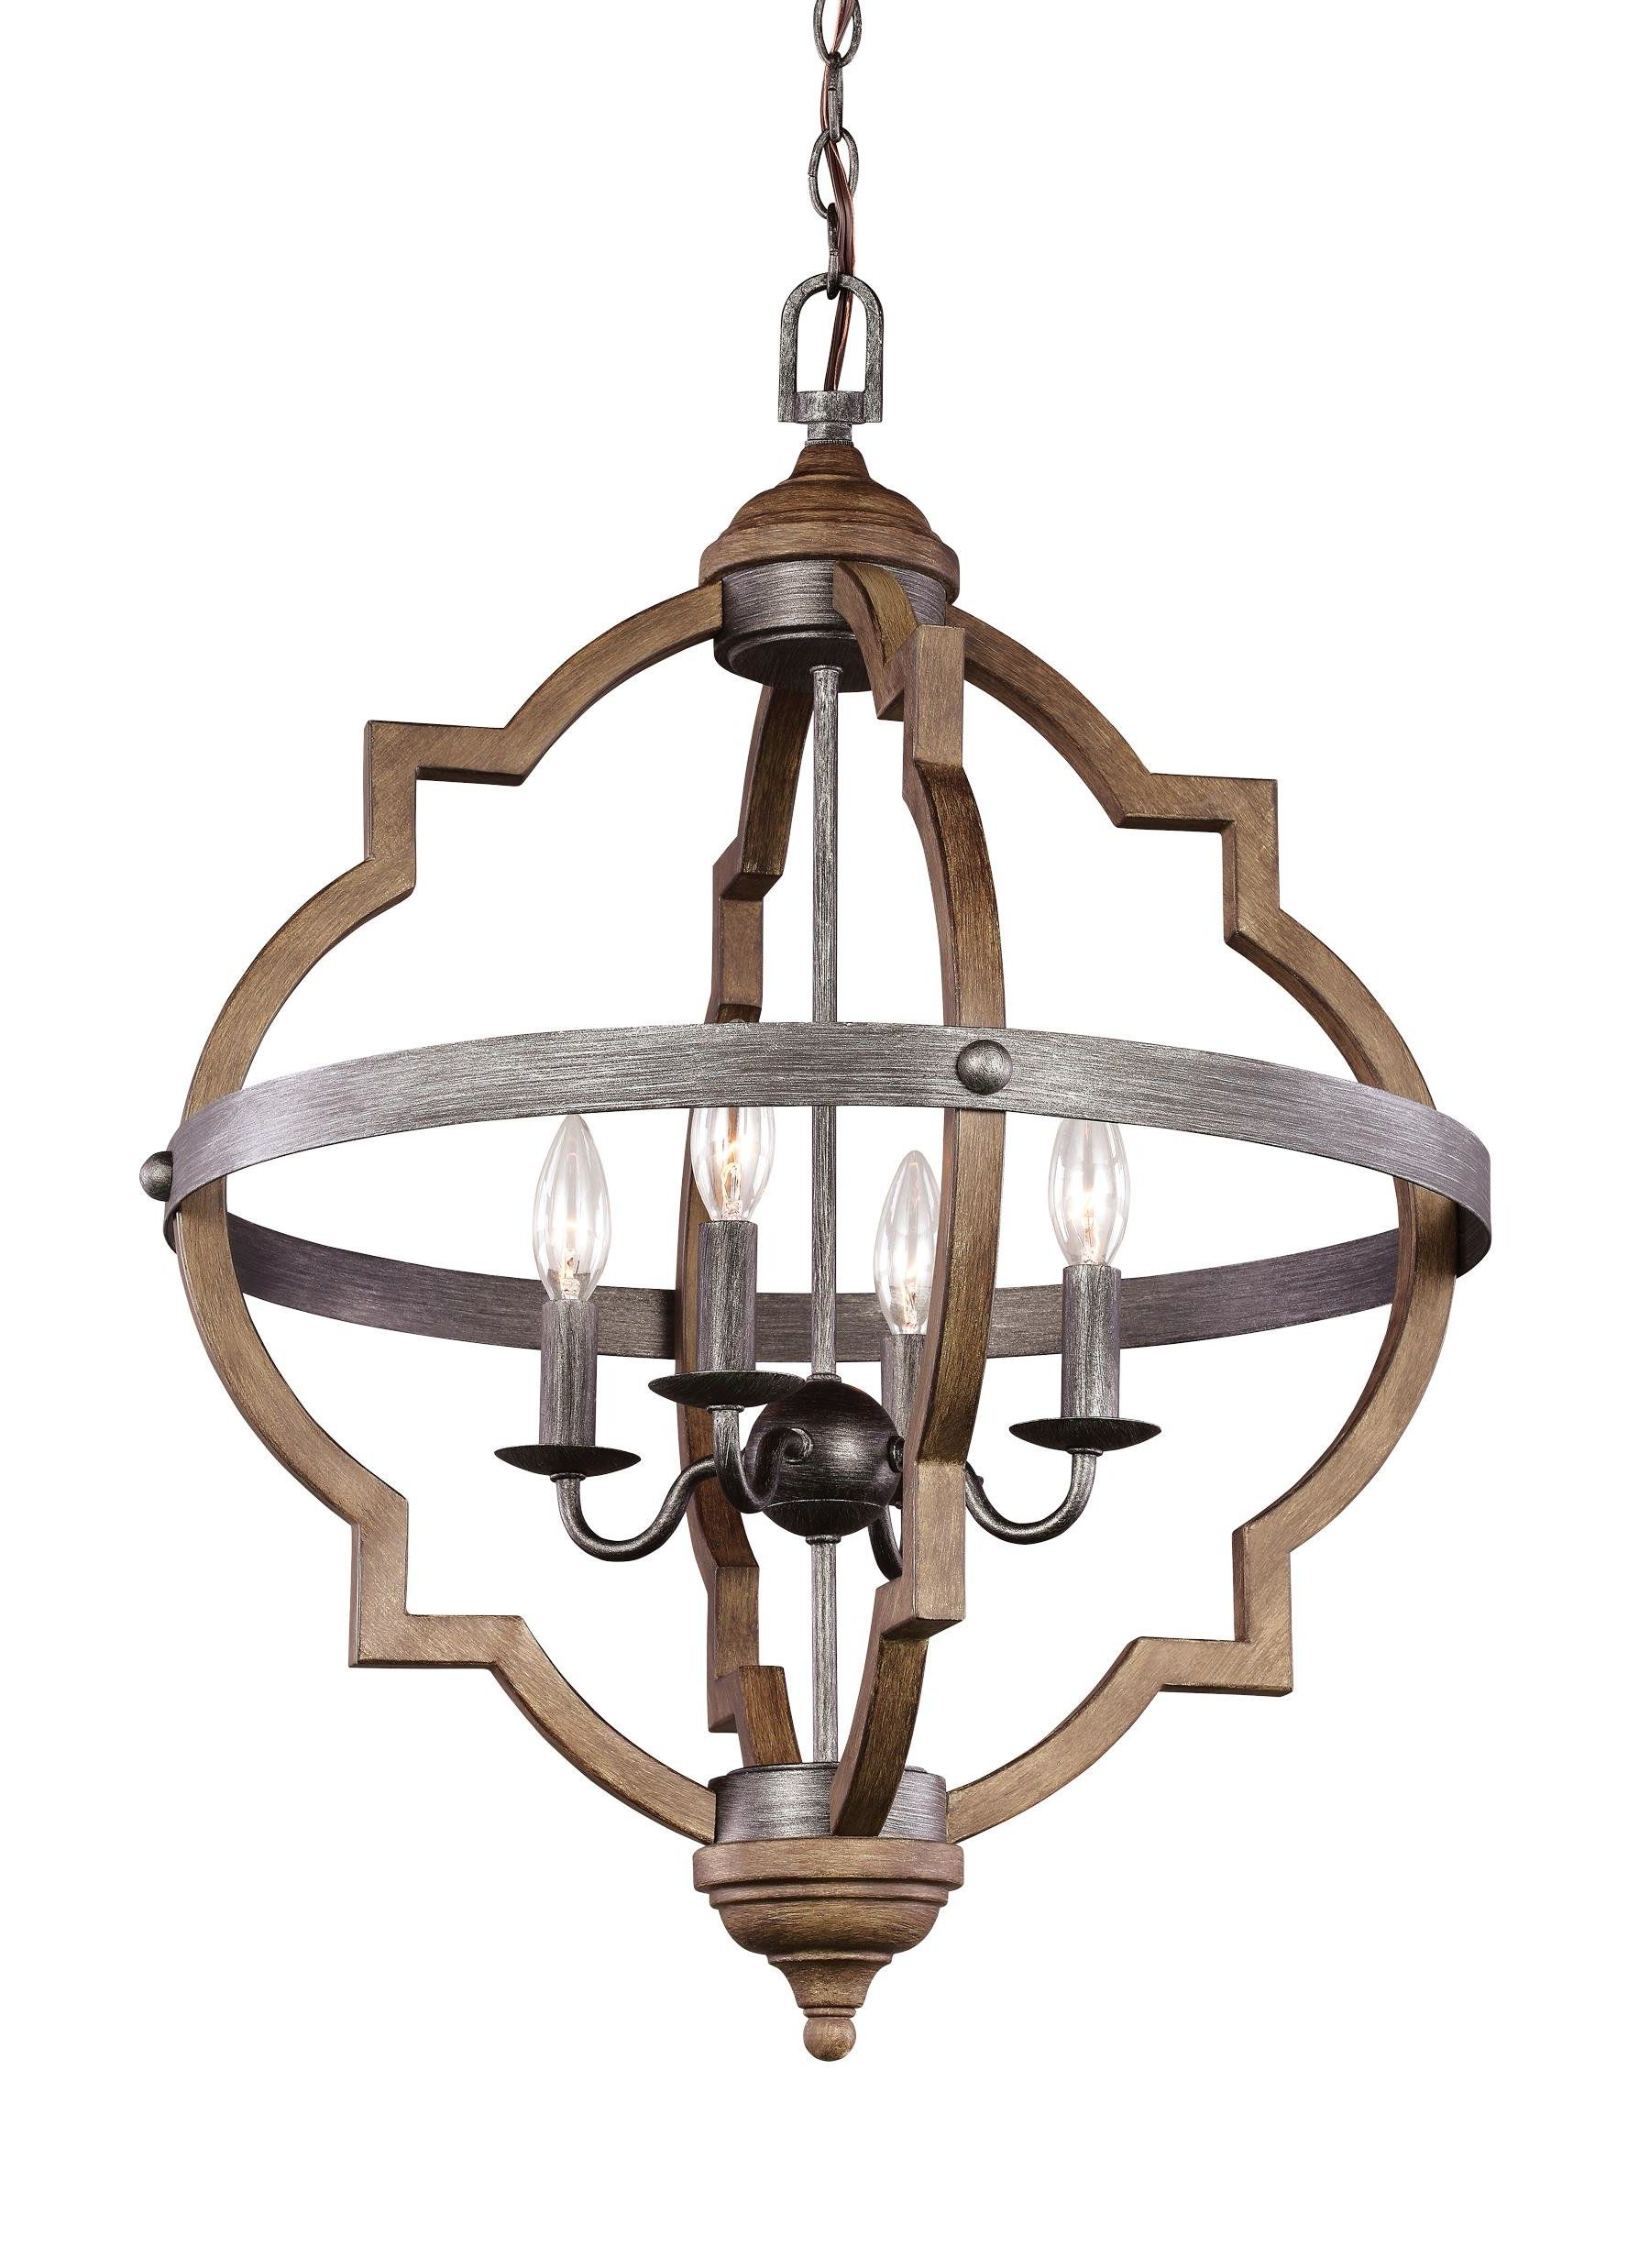 Bennington 4 Light Candle Style Chandelier Throughout Current Bennington 6 Light Candle Style Chandeliers (View 8 of 25)